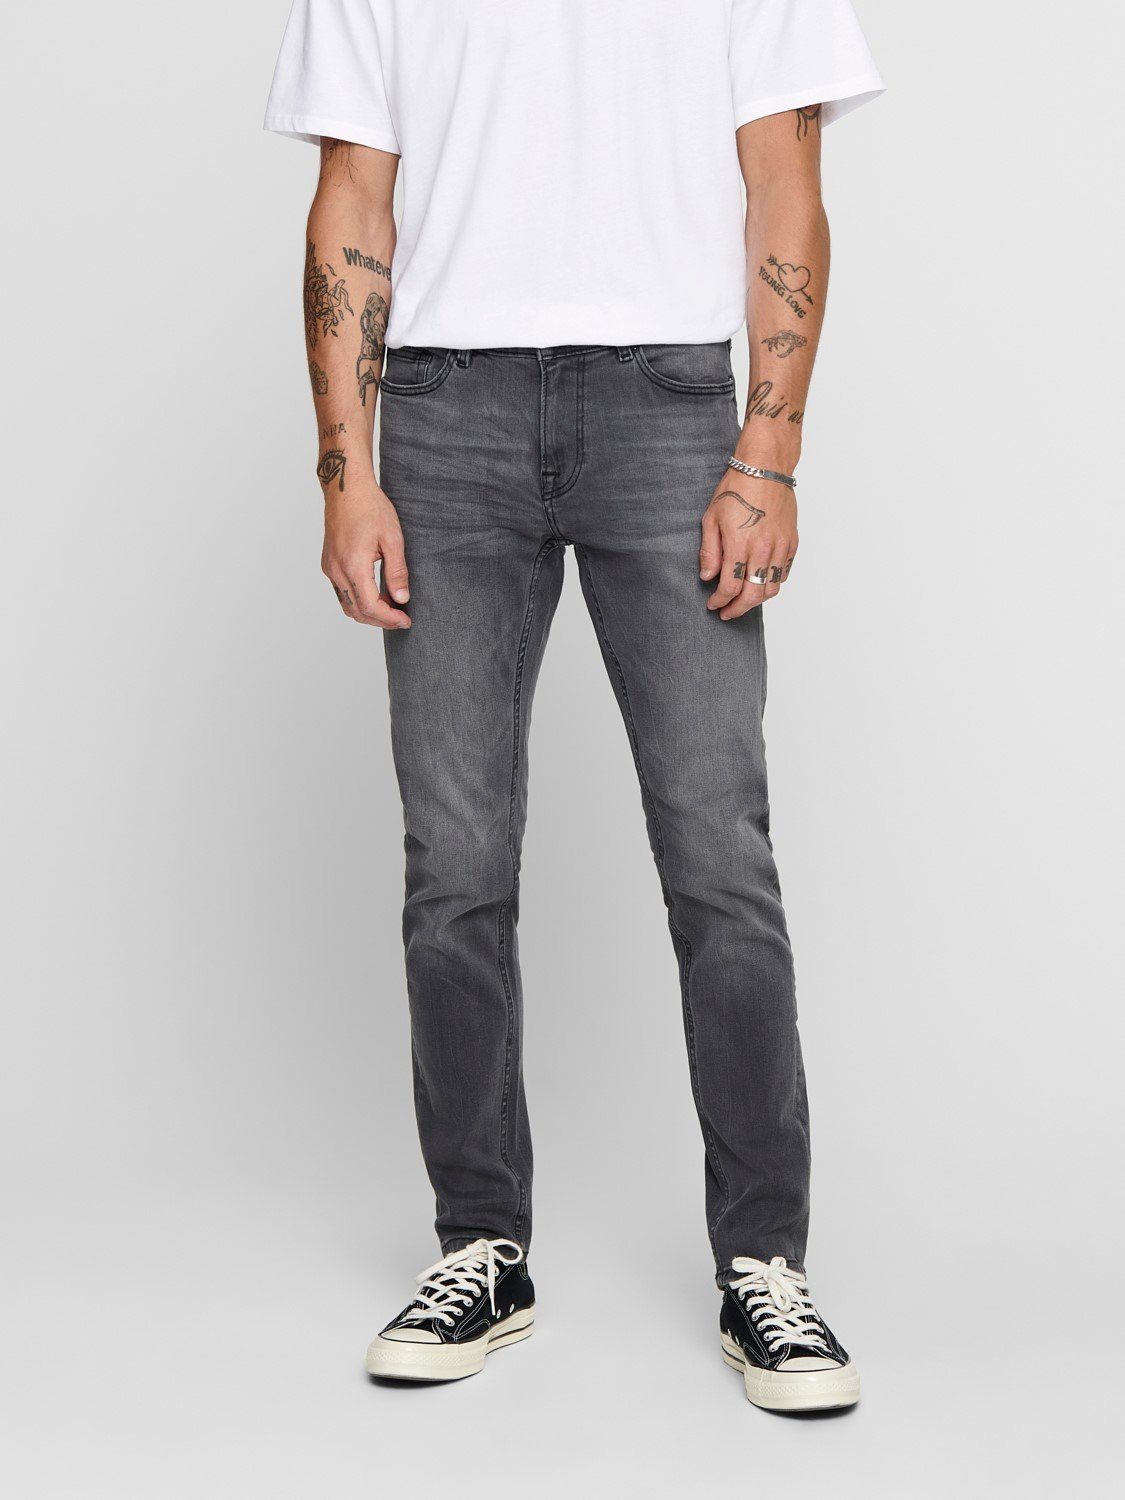 ONLY & 3977 Denim Slim-fit-Jeans SONS Pants Fit Hose Skinny (1-tlg) in Grau Washed ONSWARP Stoned Basic Jeans